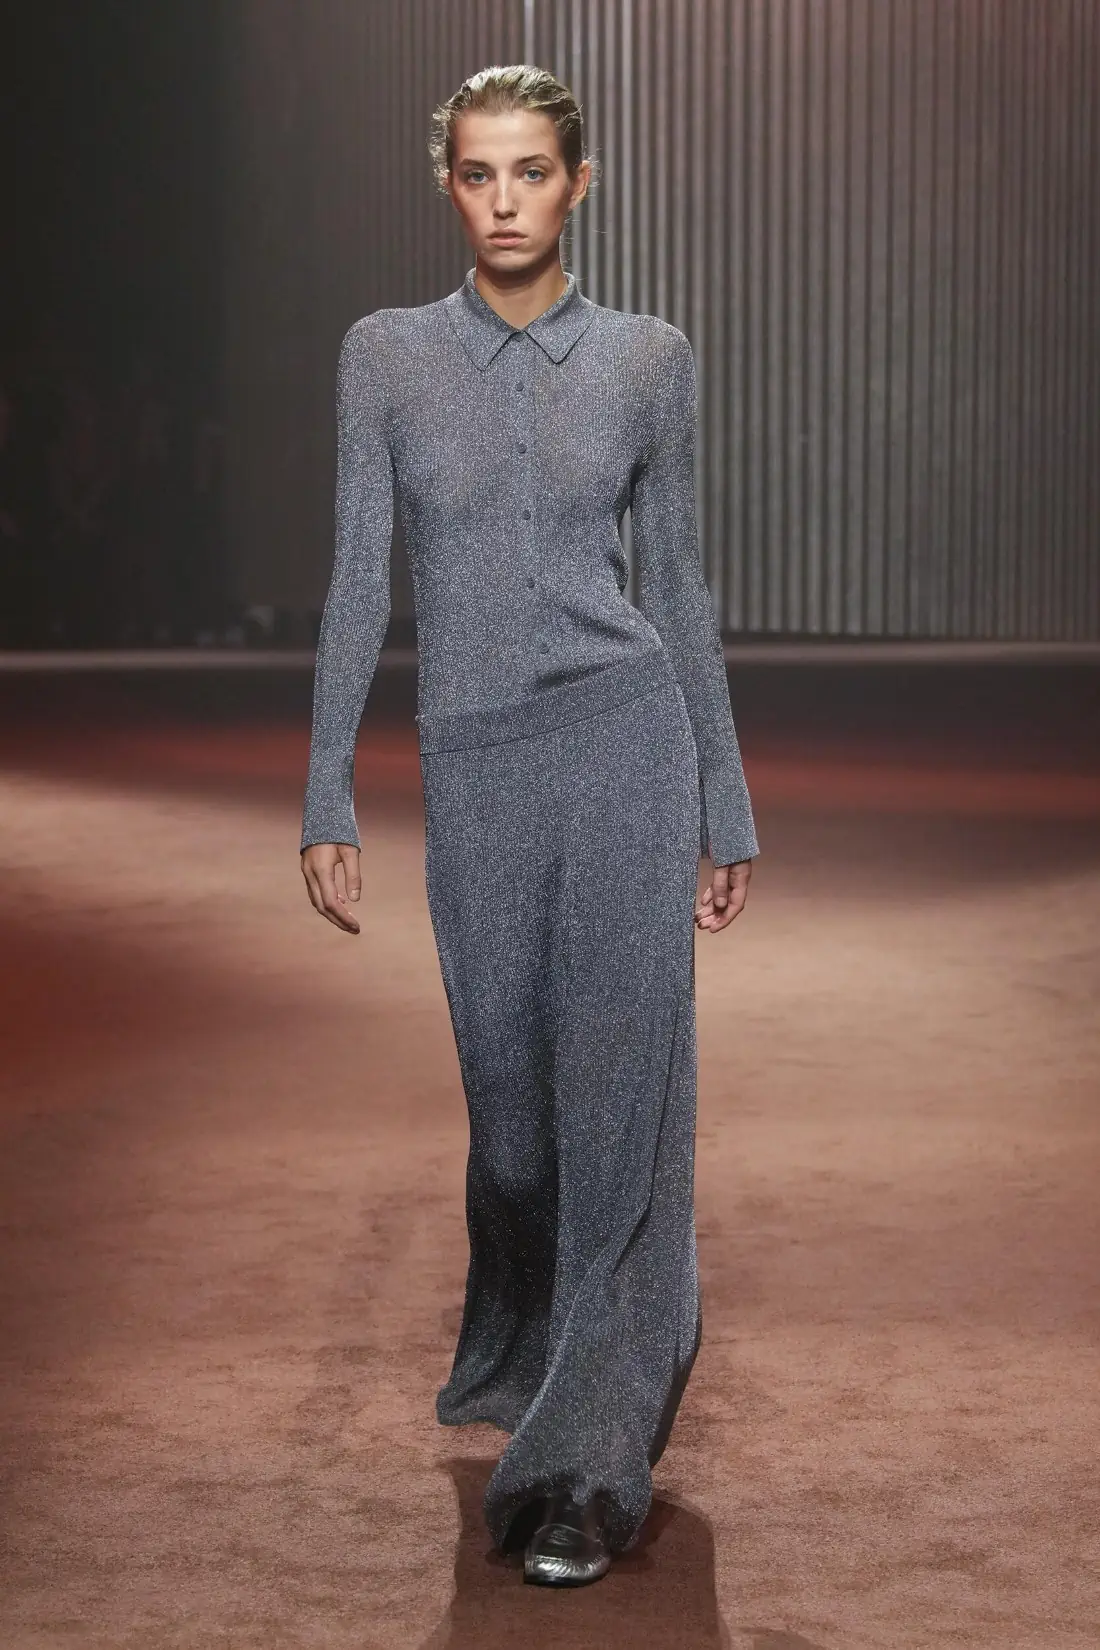 COS presents Autumn Winter 2023 at New York Fashion Week - H&M Group